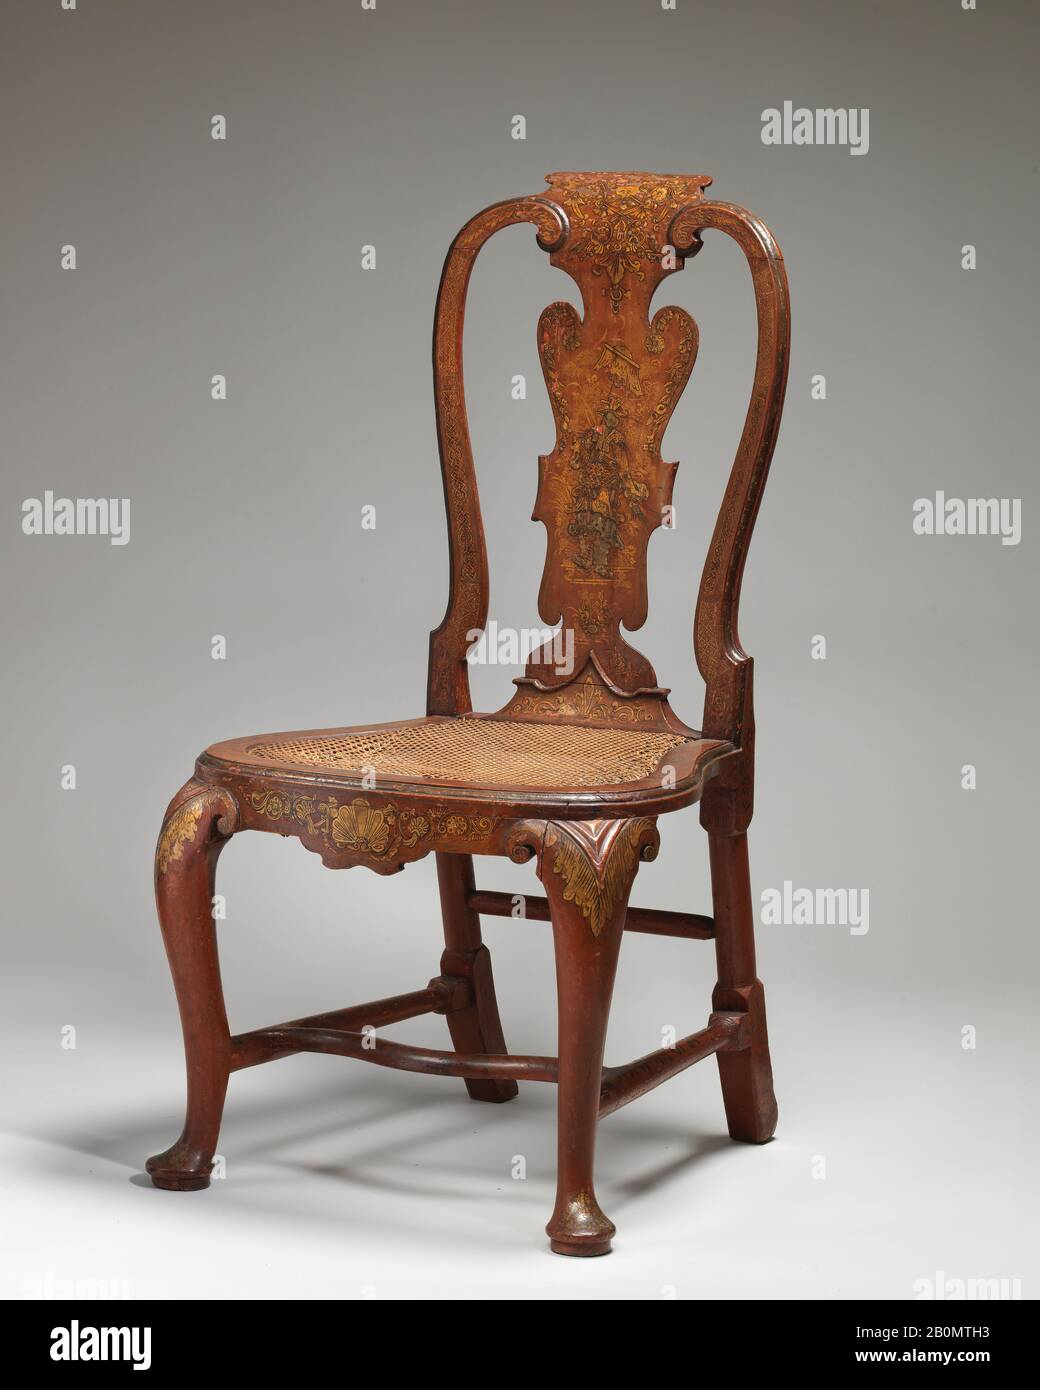 Giles Grendey, Side chair, British, Clerkenwell, London, Giles Grendey (1693–1780), ca. 1735–40, British, Clerkenwell, London, Lacquered and gilded beech; caning, Overall: 41 1/2 × 21 1/2 × 19 3/4 in. (105.4 × 54.6 × 50.2 cm), Woodwork-Furniture Stock Photo